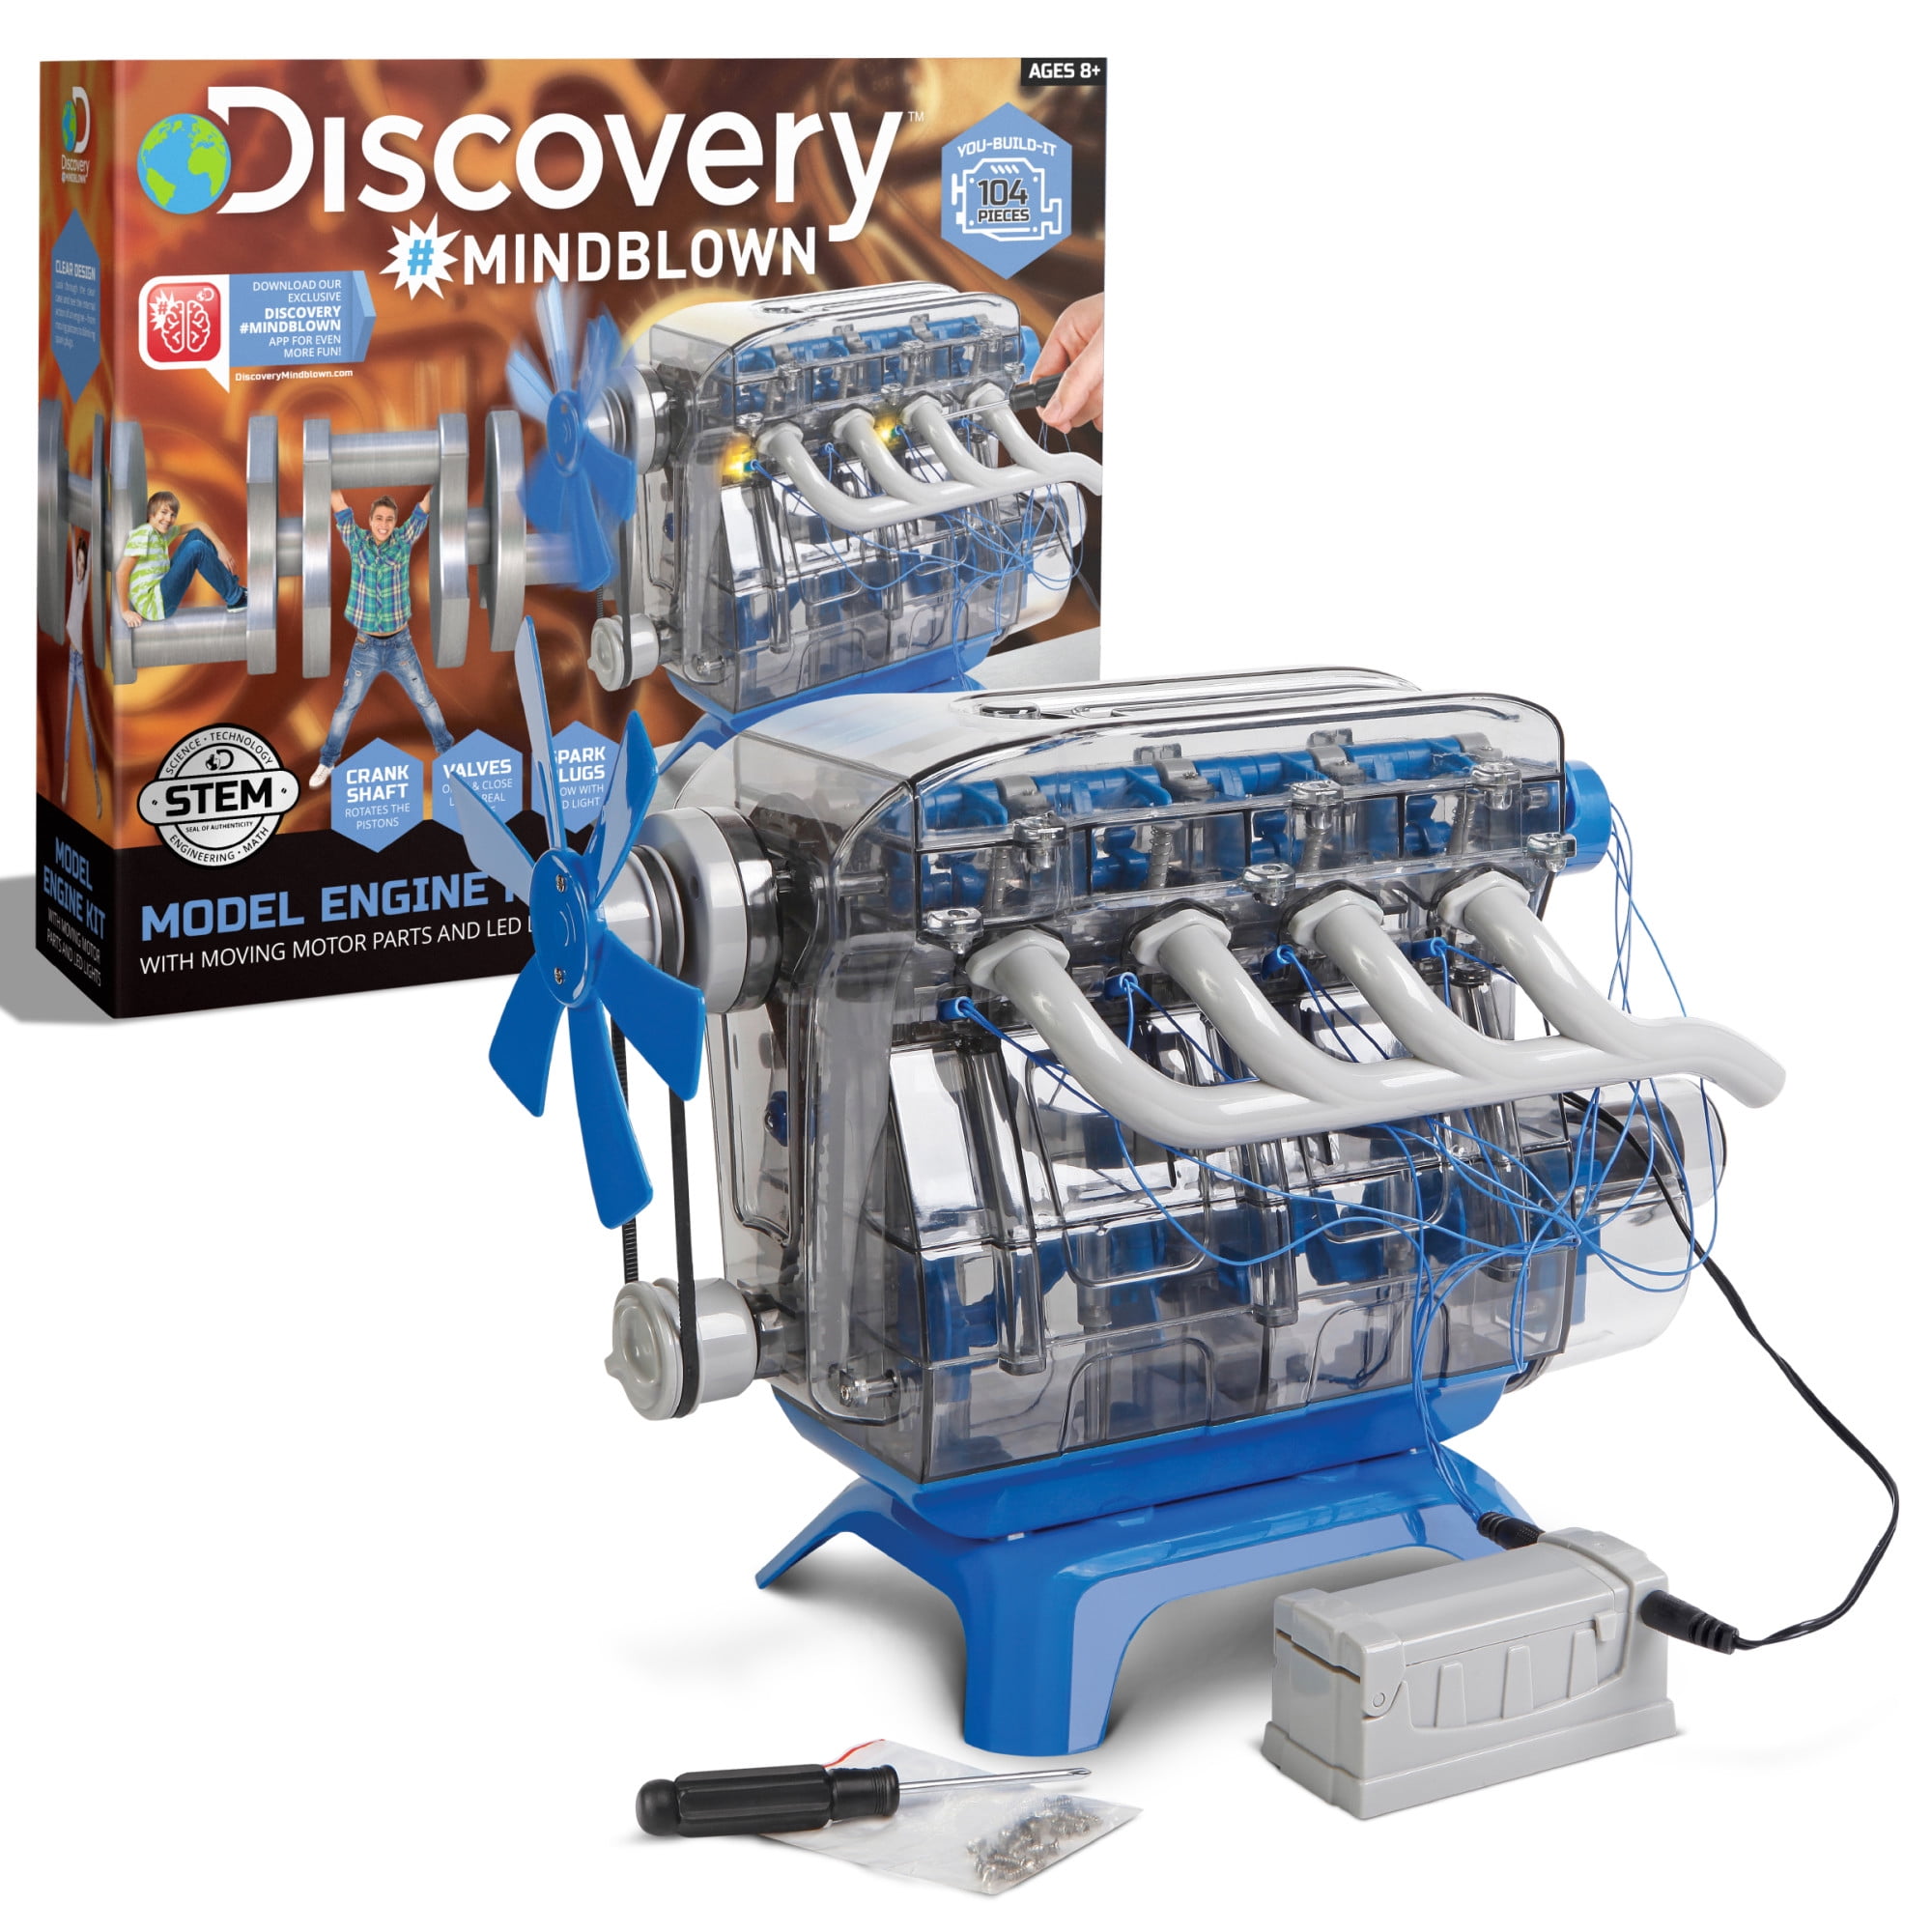 Discovery #mindblown 1013115 Kids DIY Model Engine Toy Kit for sale online